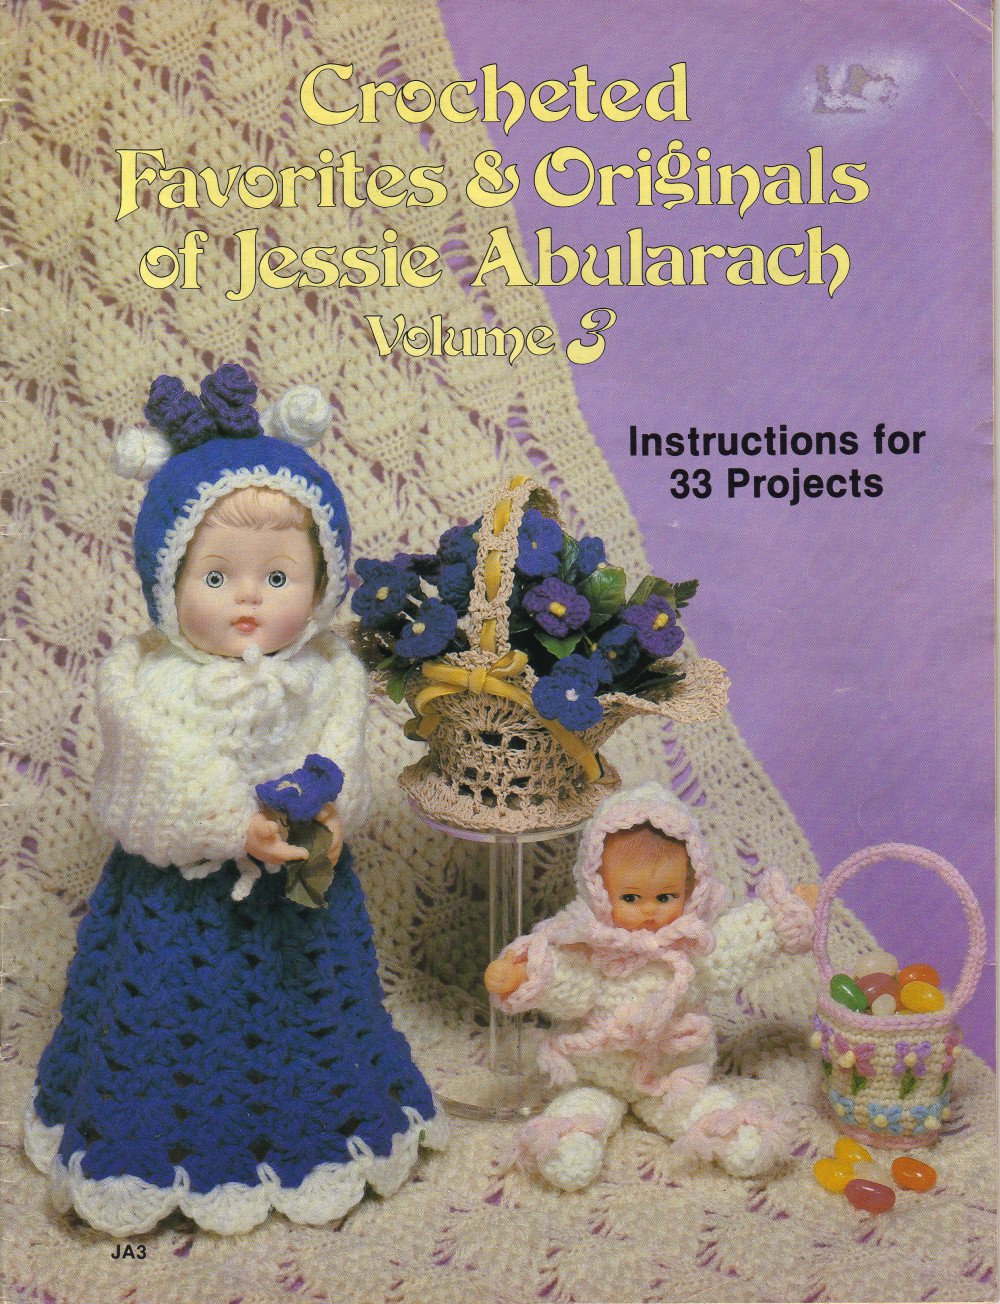 Crocheted Favorites & Originals of Jessie Abularach Volume 3 Instructions for 33 project